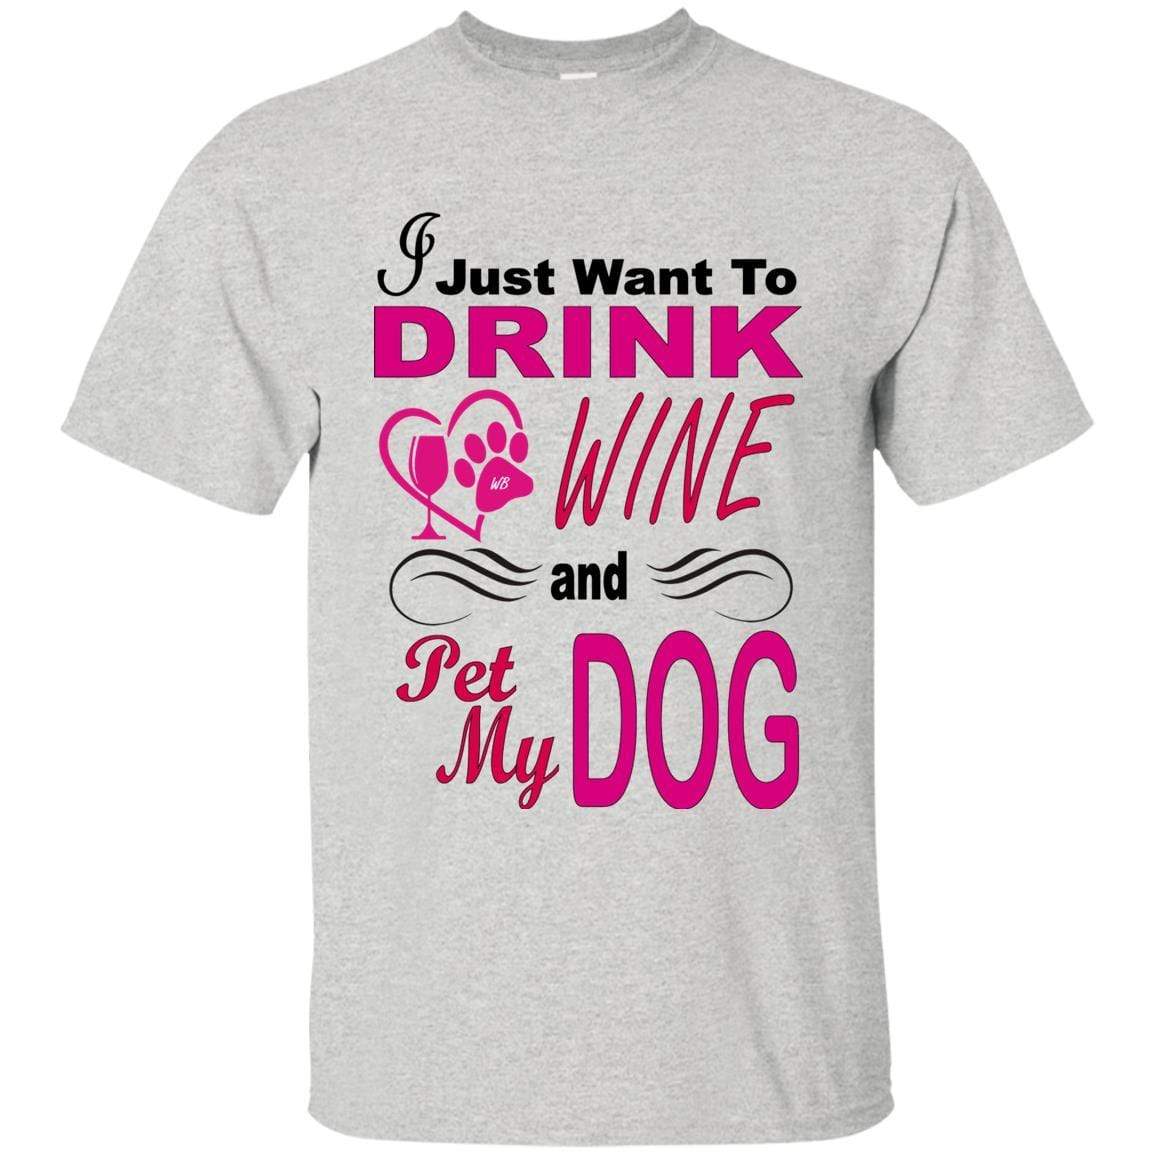 T-Shirts Ash / S WineyBitches.co "I Just Want To Drink Wine & Pet My Dog" Ultra Cotton T-Shirt WineyBitchesCo